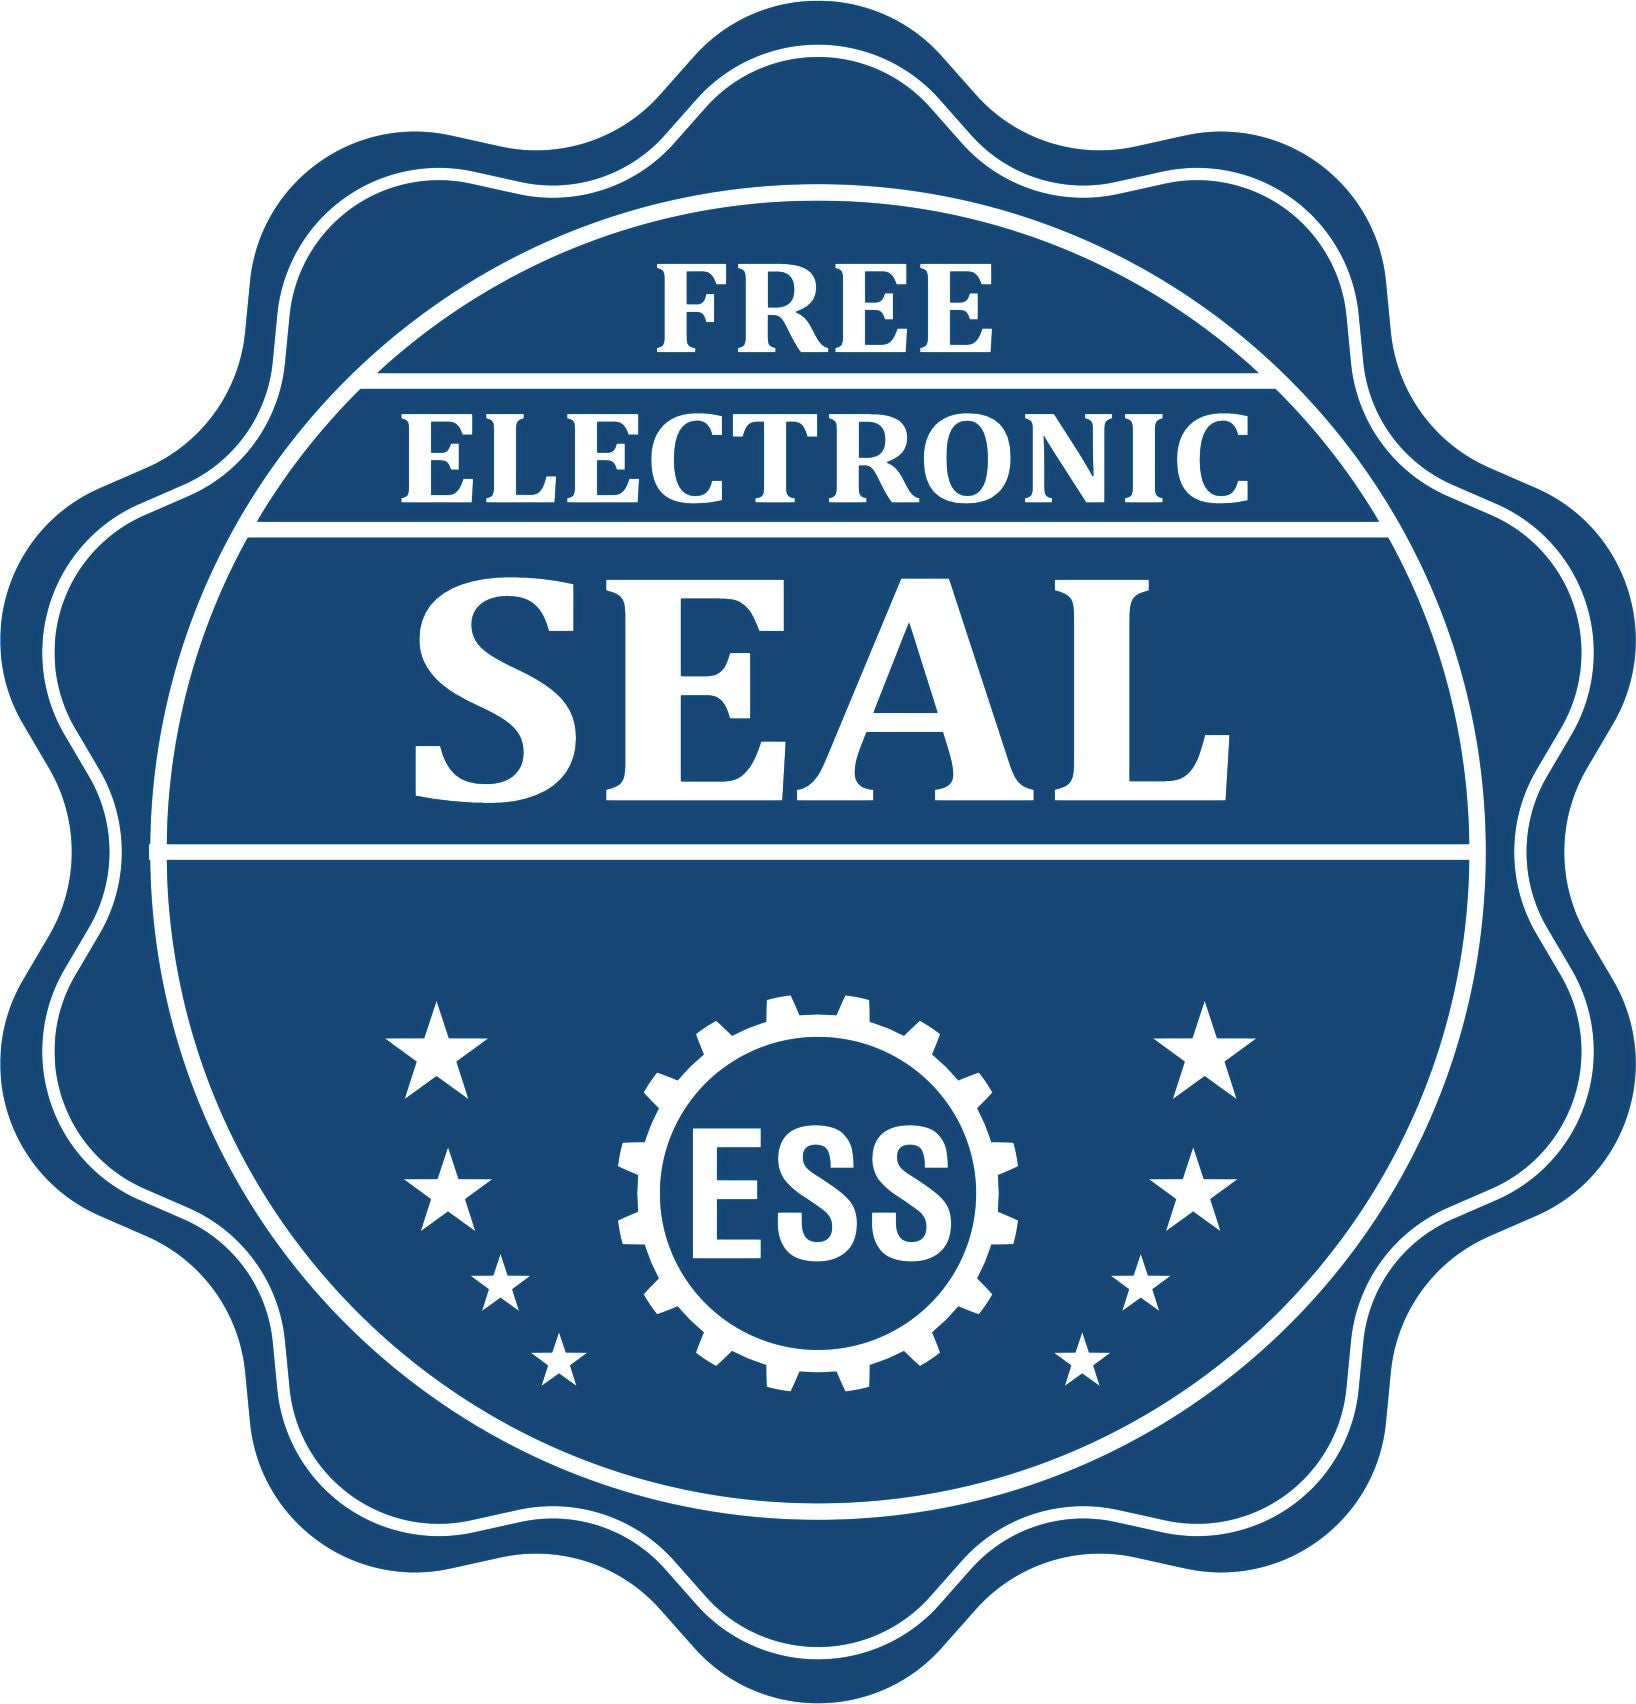 A badge showing a free electronic seal for the Self-Inking New Hampshire Landscape Architect Stamp with stars and the ESS gear on the emblem.